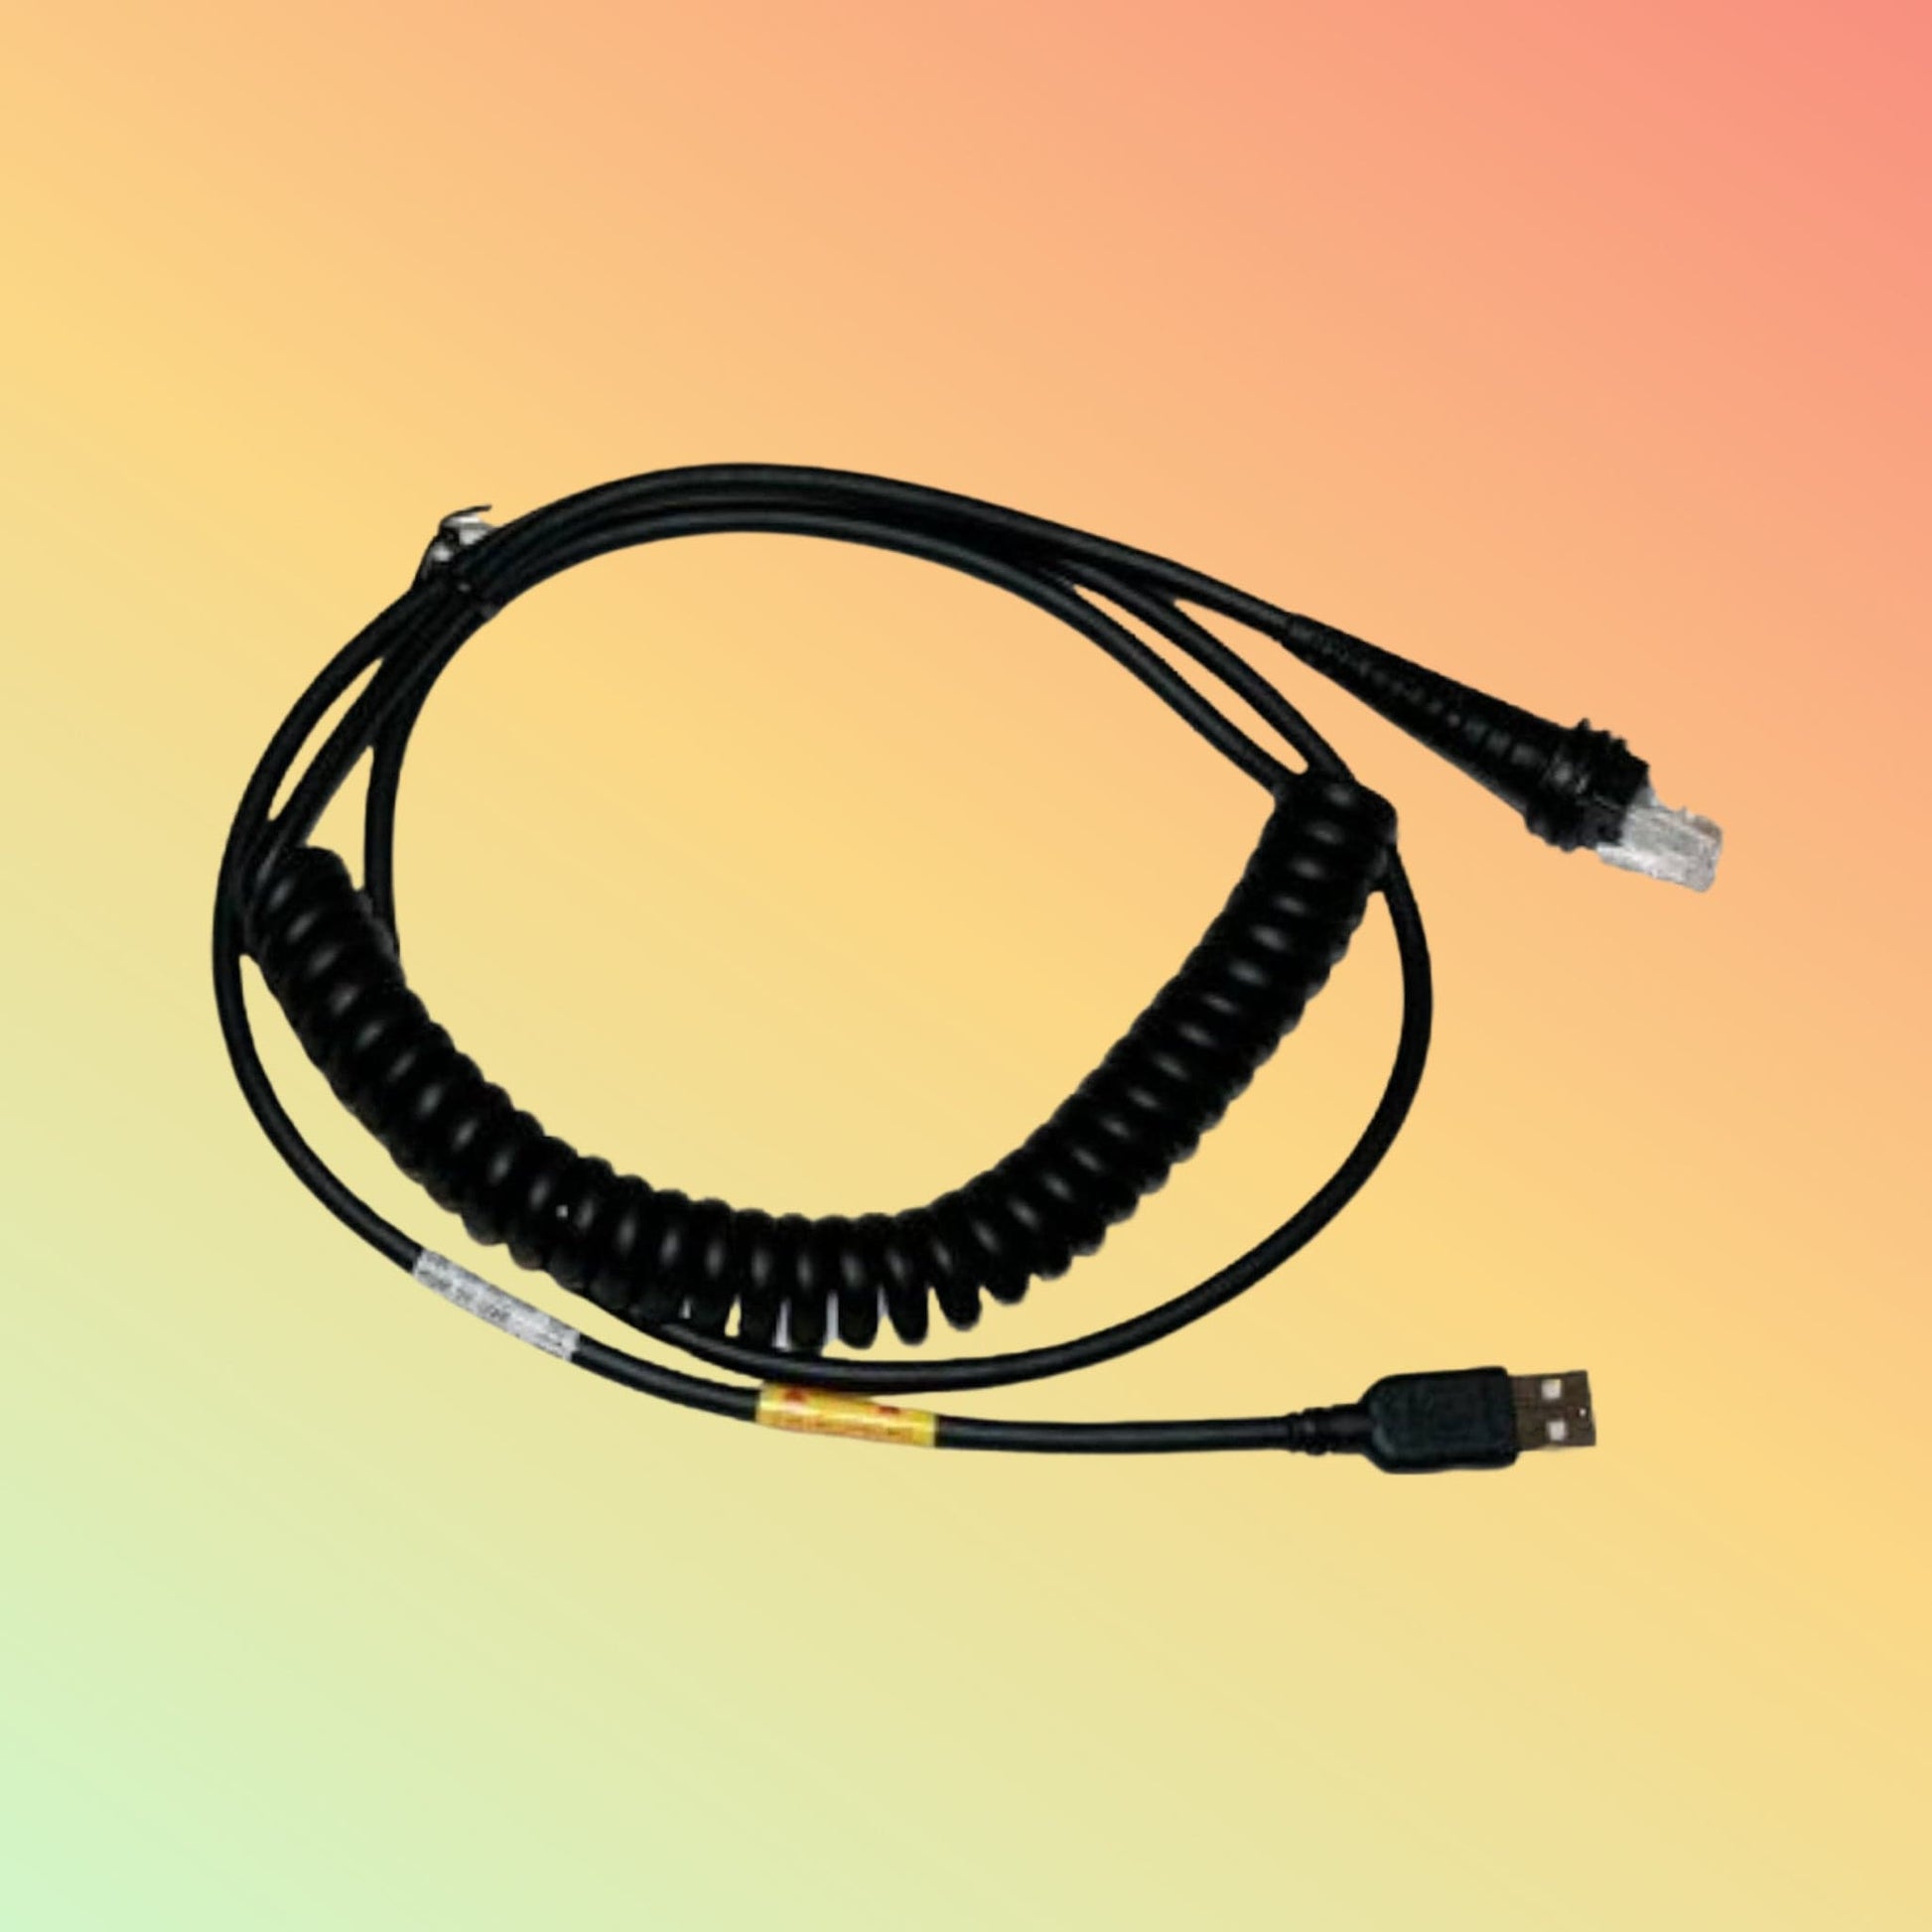 USB Cable - Zebra DS3608DPX - NEOTECH